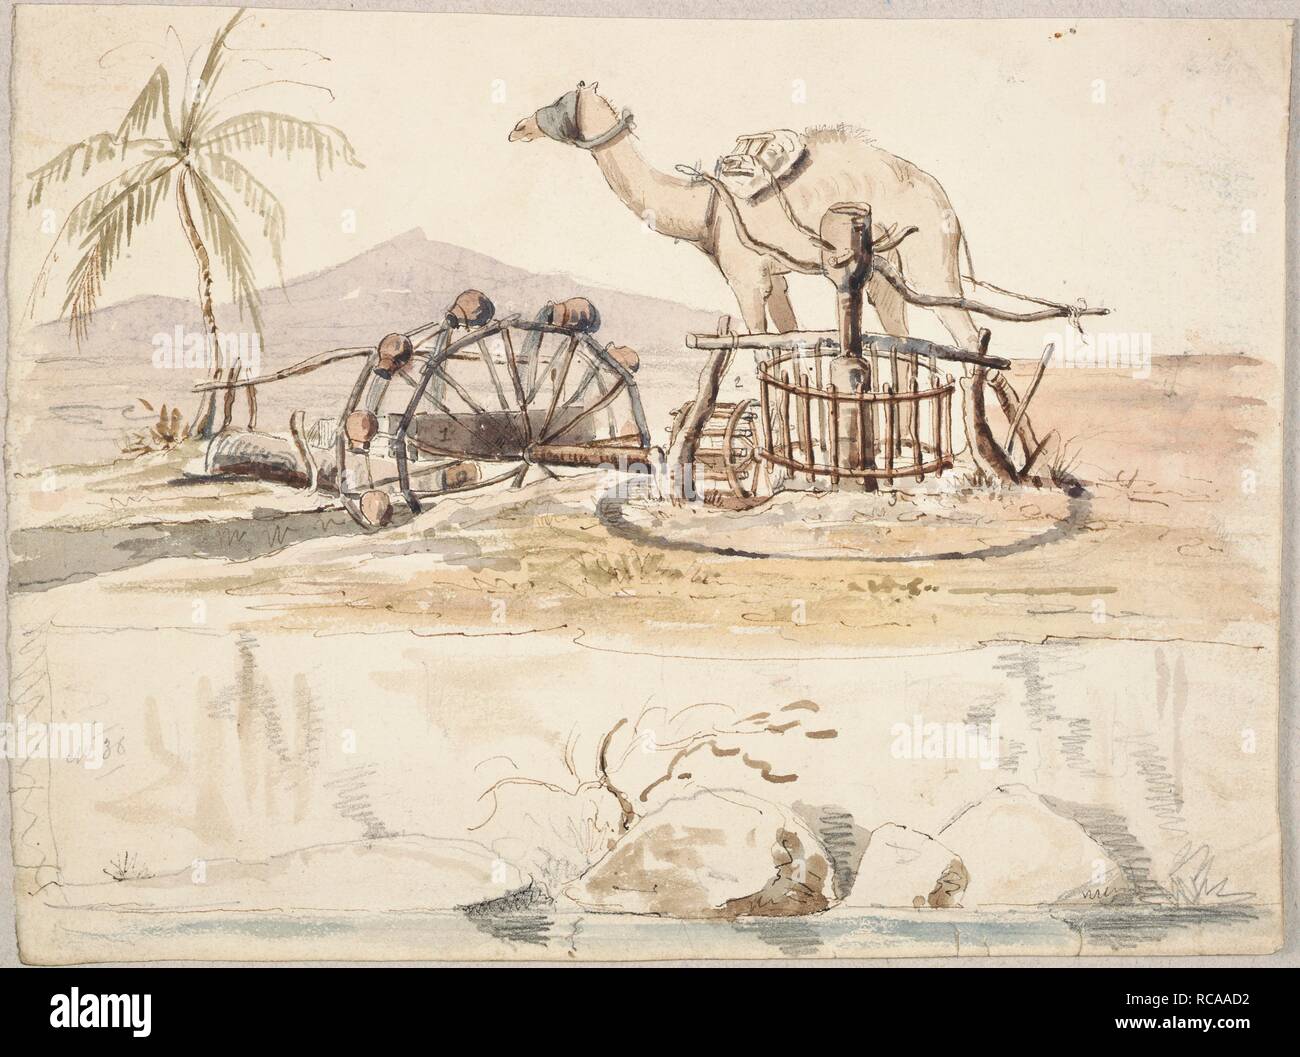 Raising water from the Indus. Personal Observations on Sindh. 1830-1845. Raising water from the Indus. No.36. Camel and Persian wheel. Pencil, pen and ink and wash, watercolour, oil and pastel..  Image taken from Personal Observations on Sindh.  Originally published/produced in 1830-1845. . Source: WD 485, f.7v. Author: POSTANS, THOMAS. Stock Photo